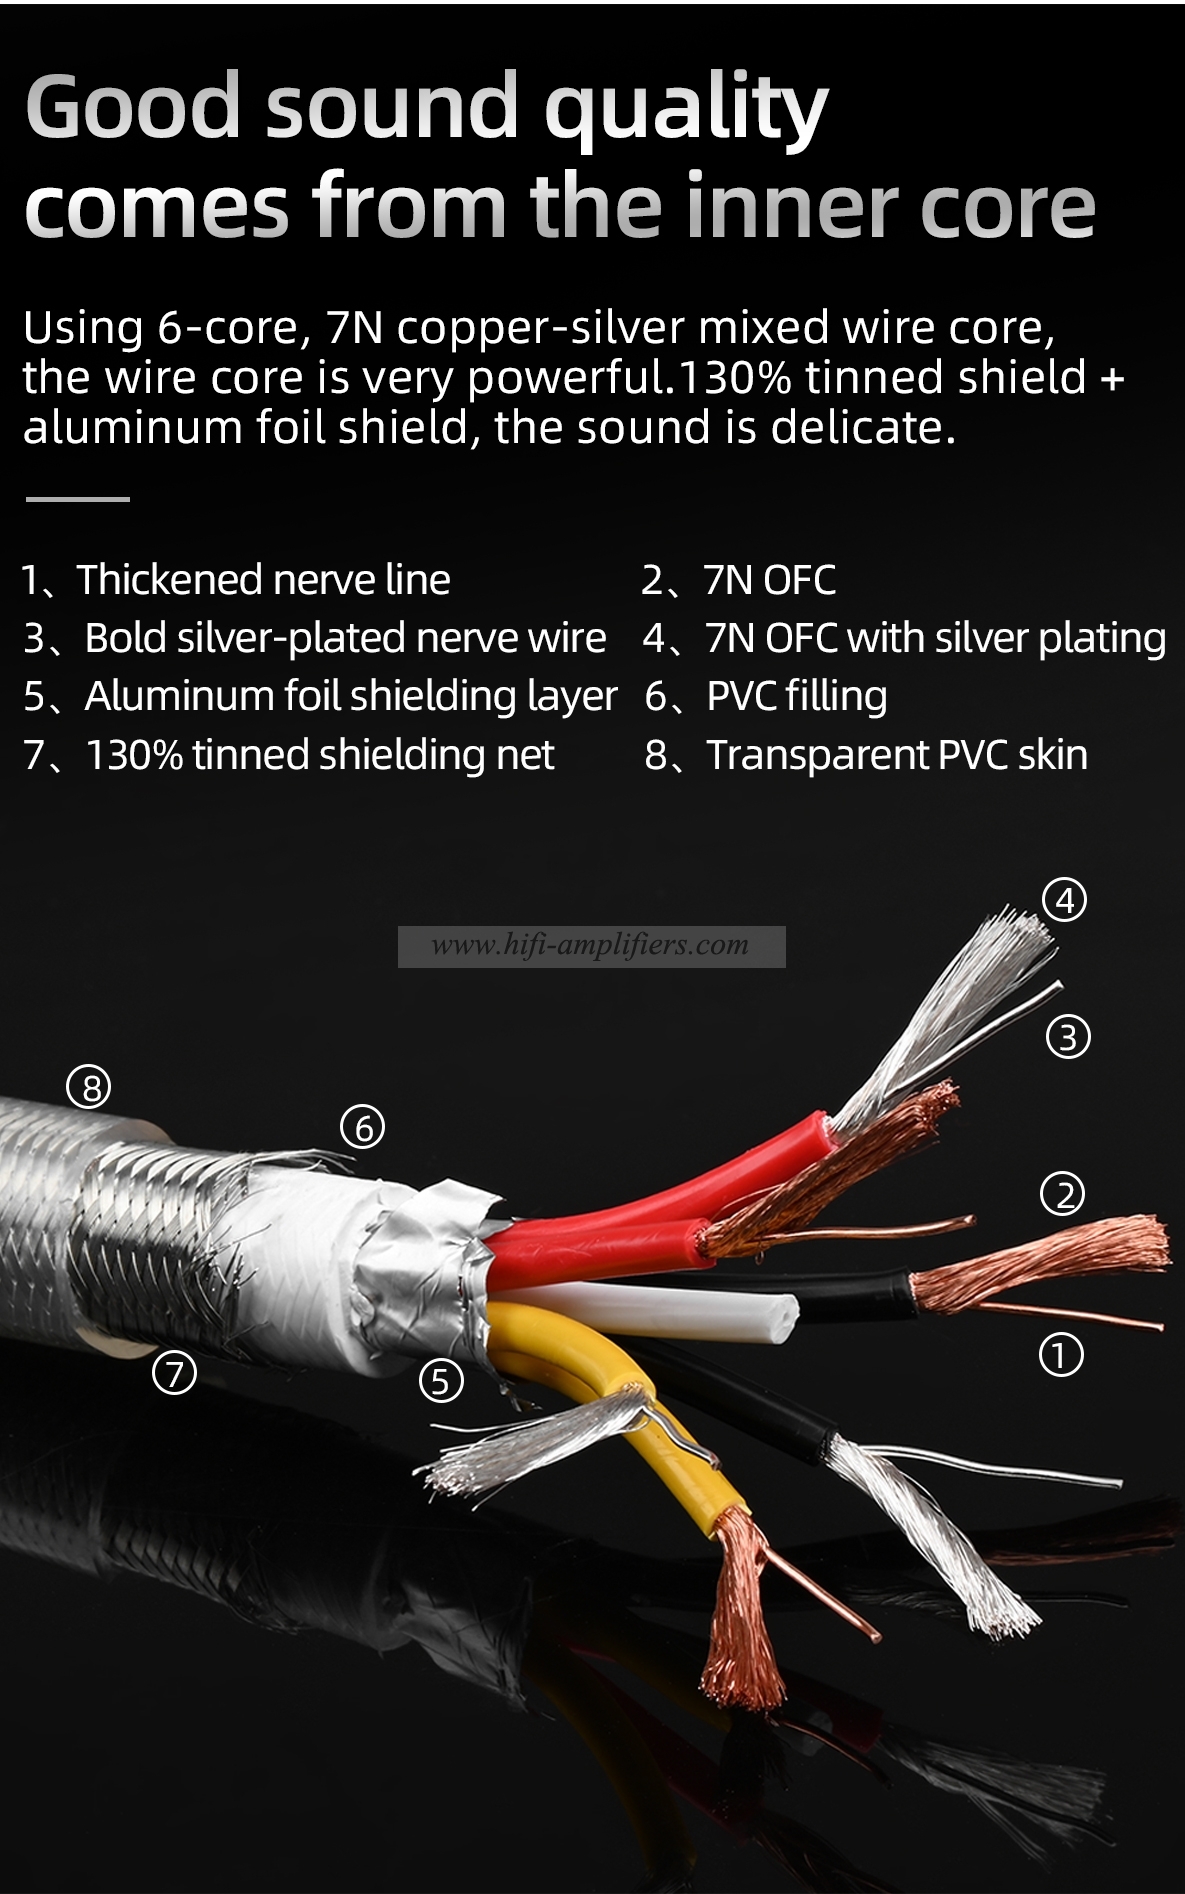 HiFi Power Cable High Quality Copper and Silver Extension Power Cord With Schuko Power Plug